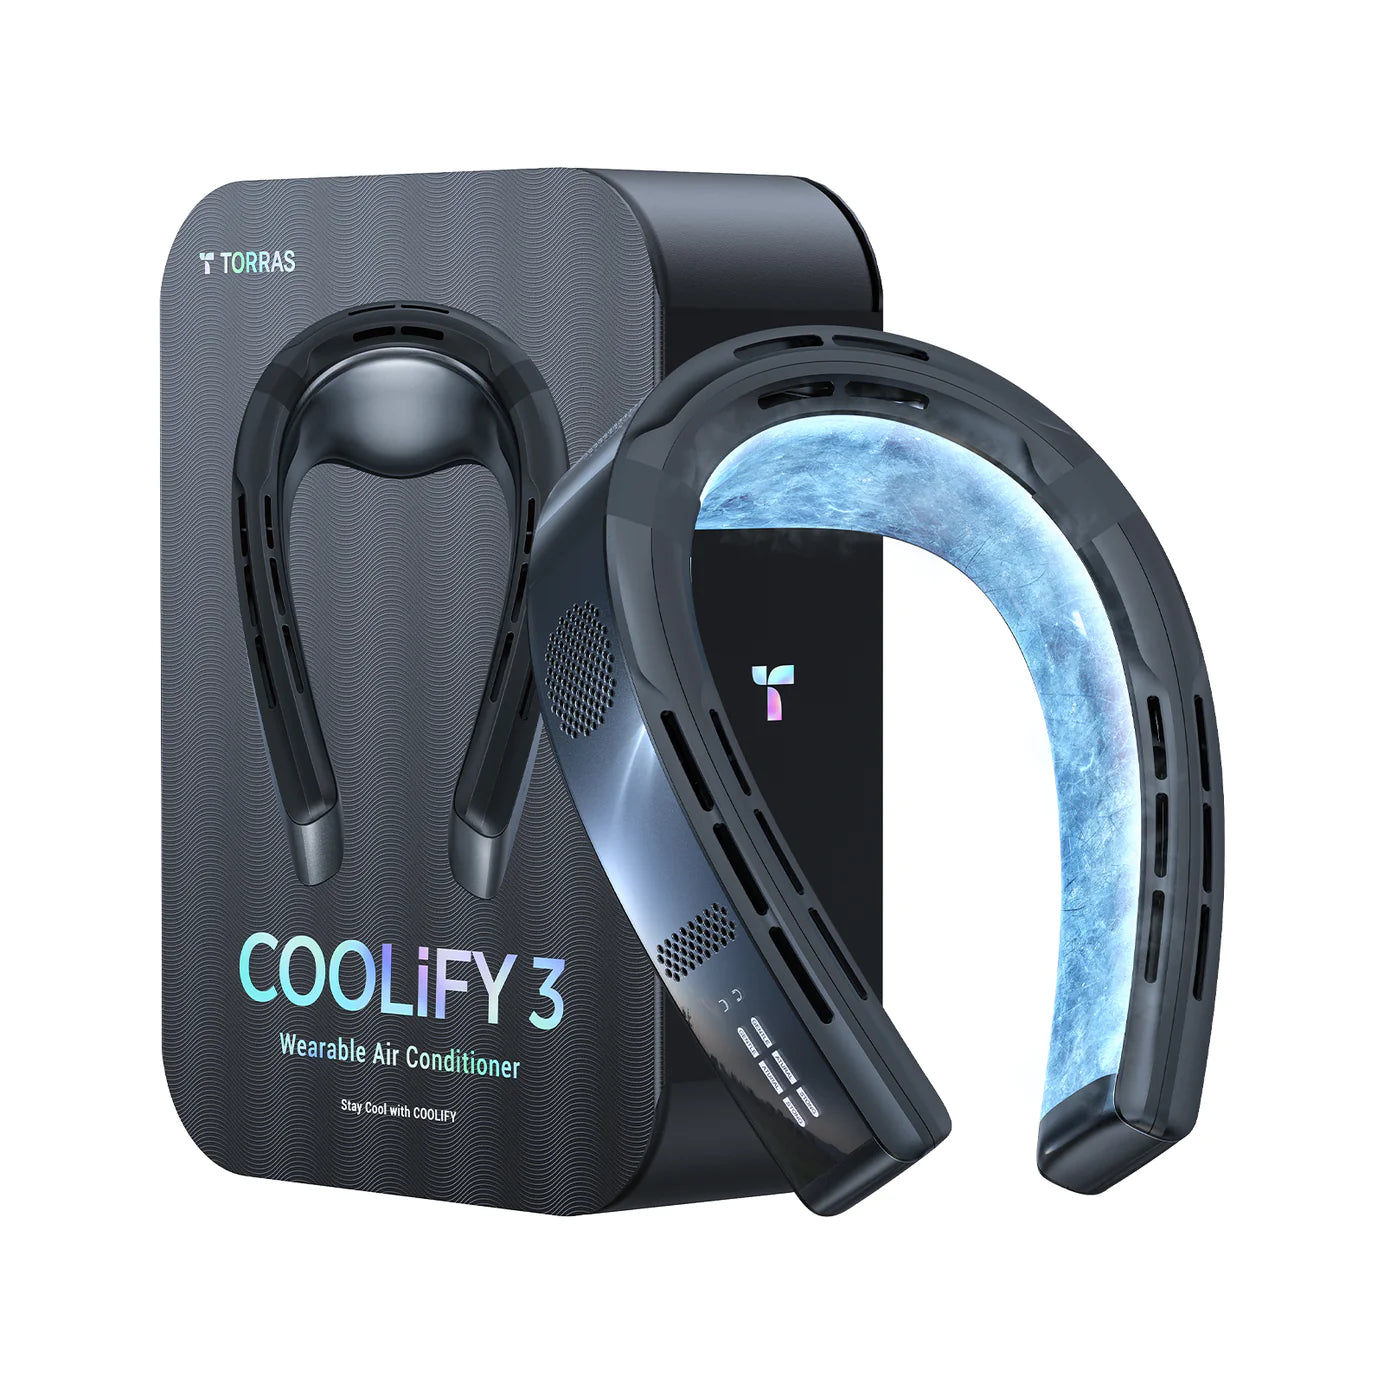 TORRAS Coolify 3 - Smart Wearable Air Conditioner